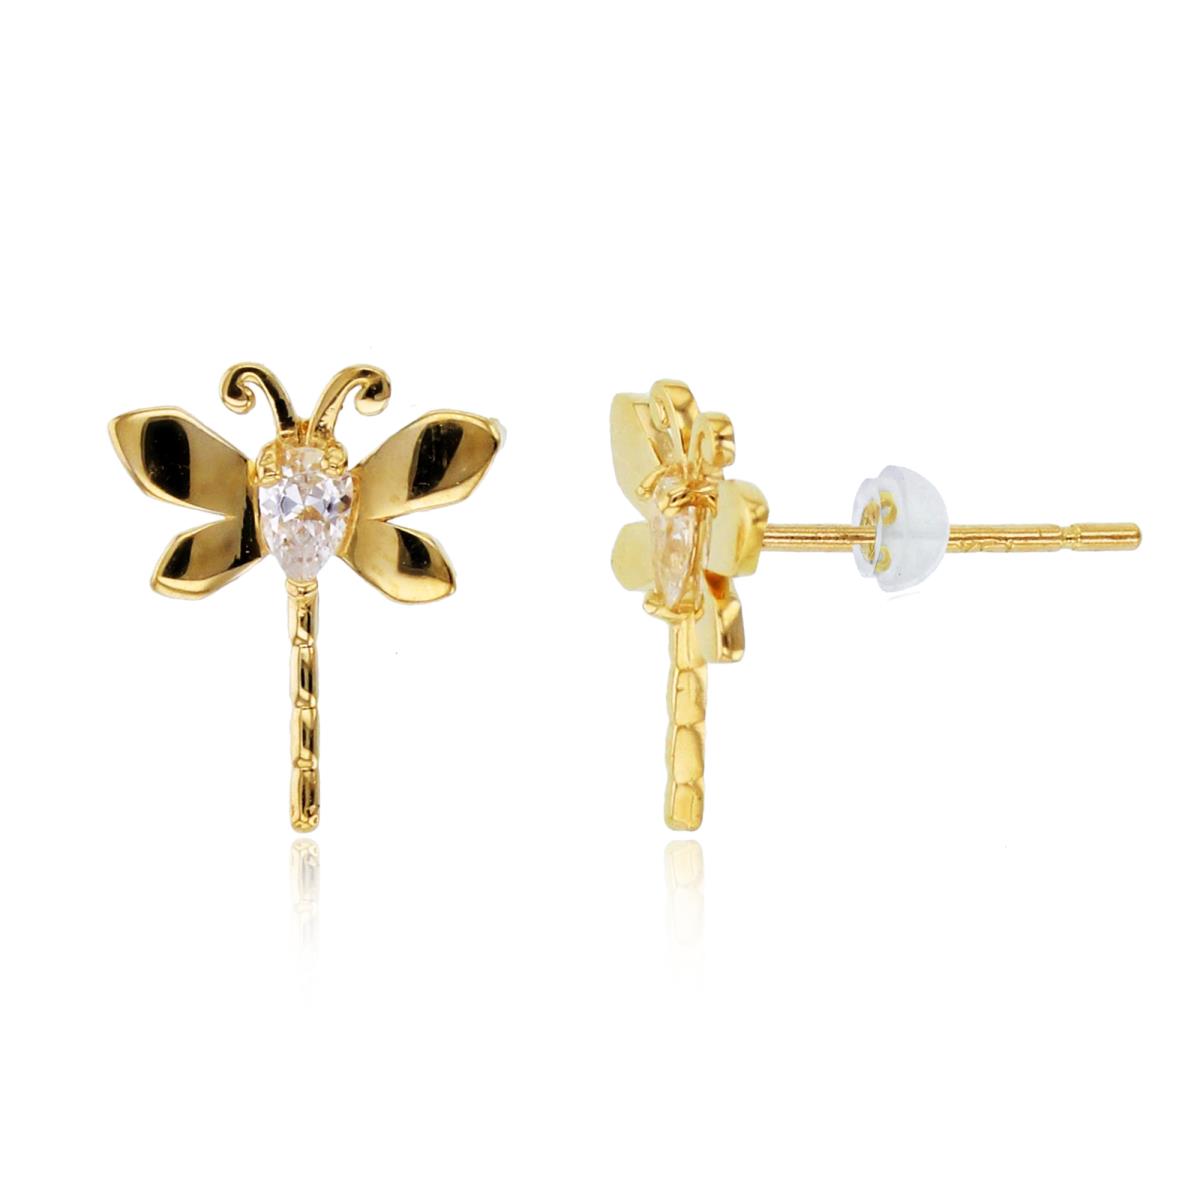 14K Yellow Gold 3x2mm PS CZ High Polished Dragonfly Studs with Silicon Backs